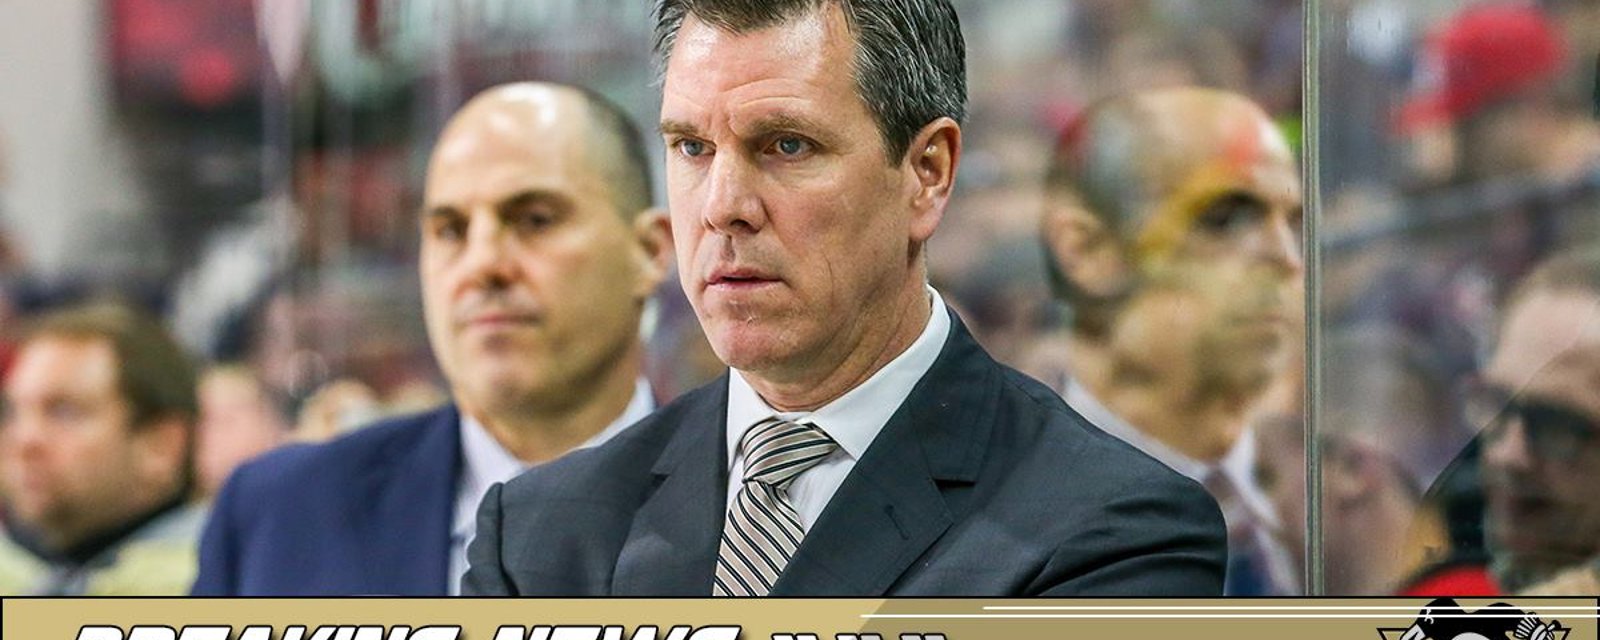 Breaking: Penguins coach responds to goaltending controversy in Pittsburgh.